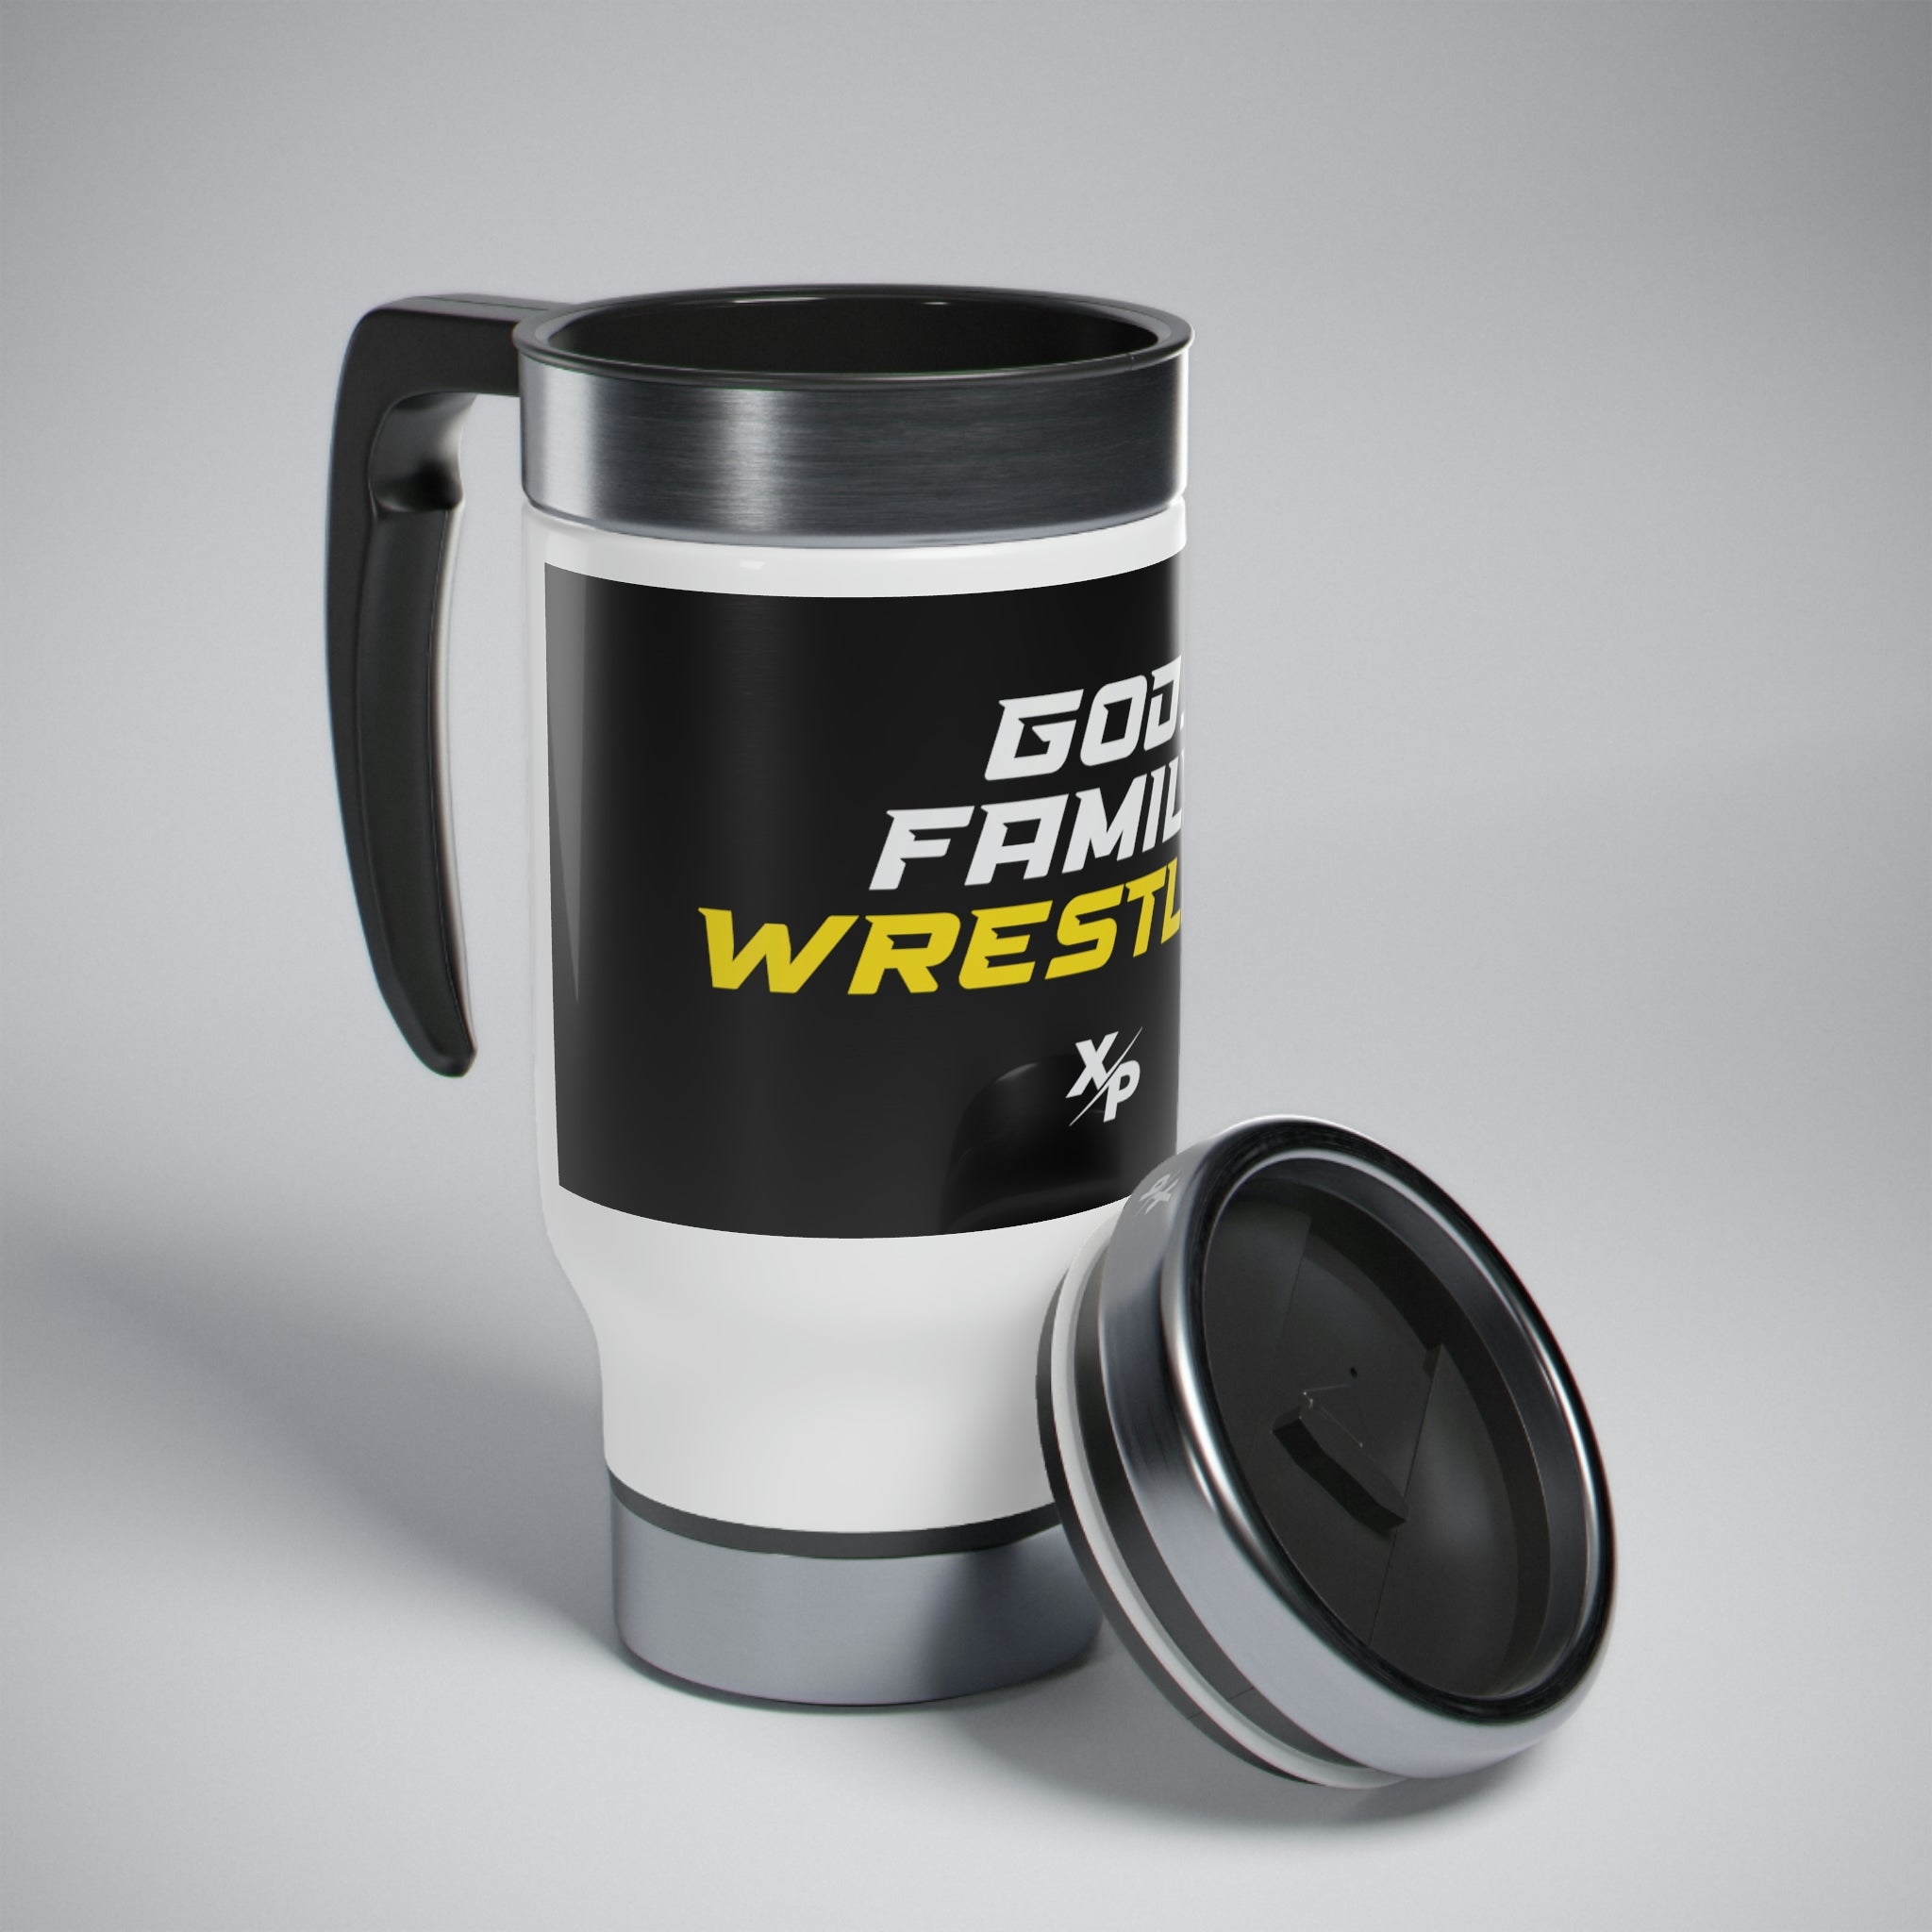 God, Family, Wrestling Stainless Steel Travel Mug with Handle, 14oz by XPA Gear